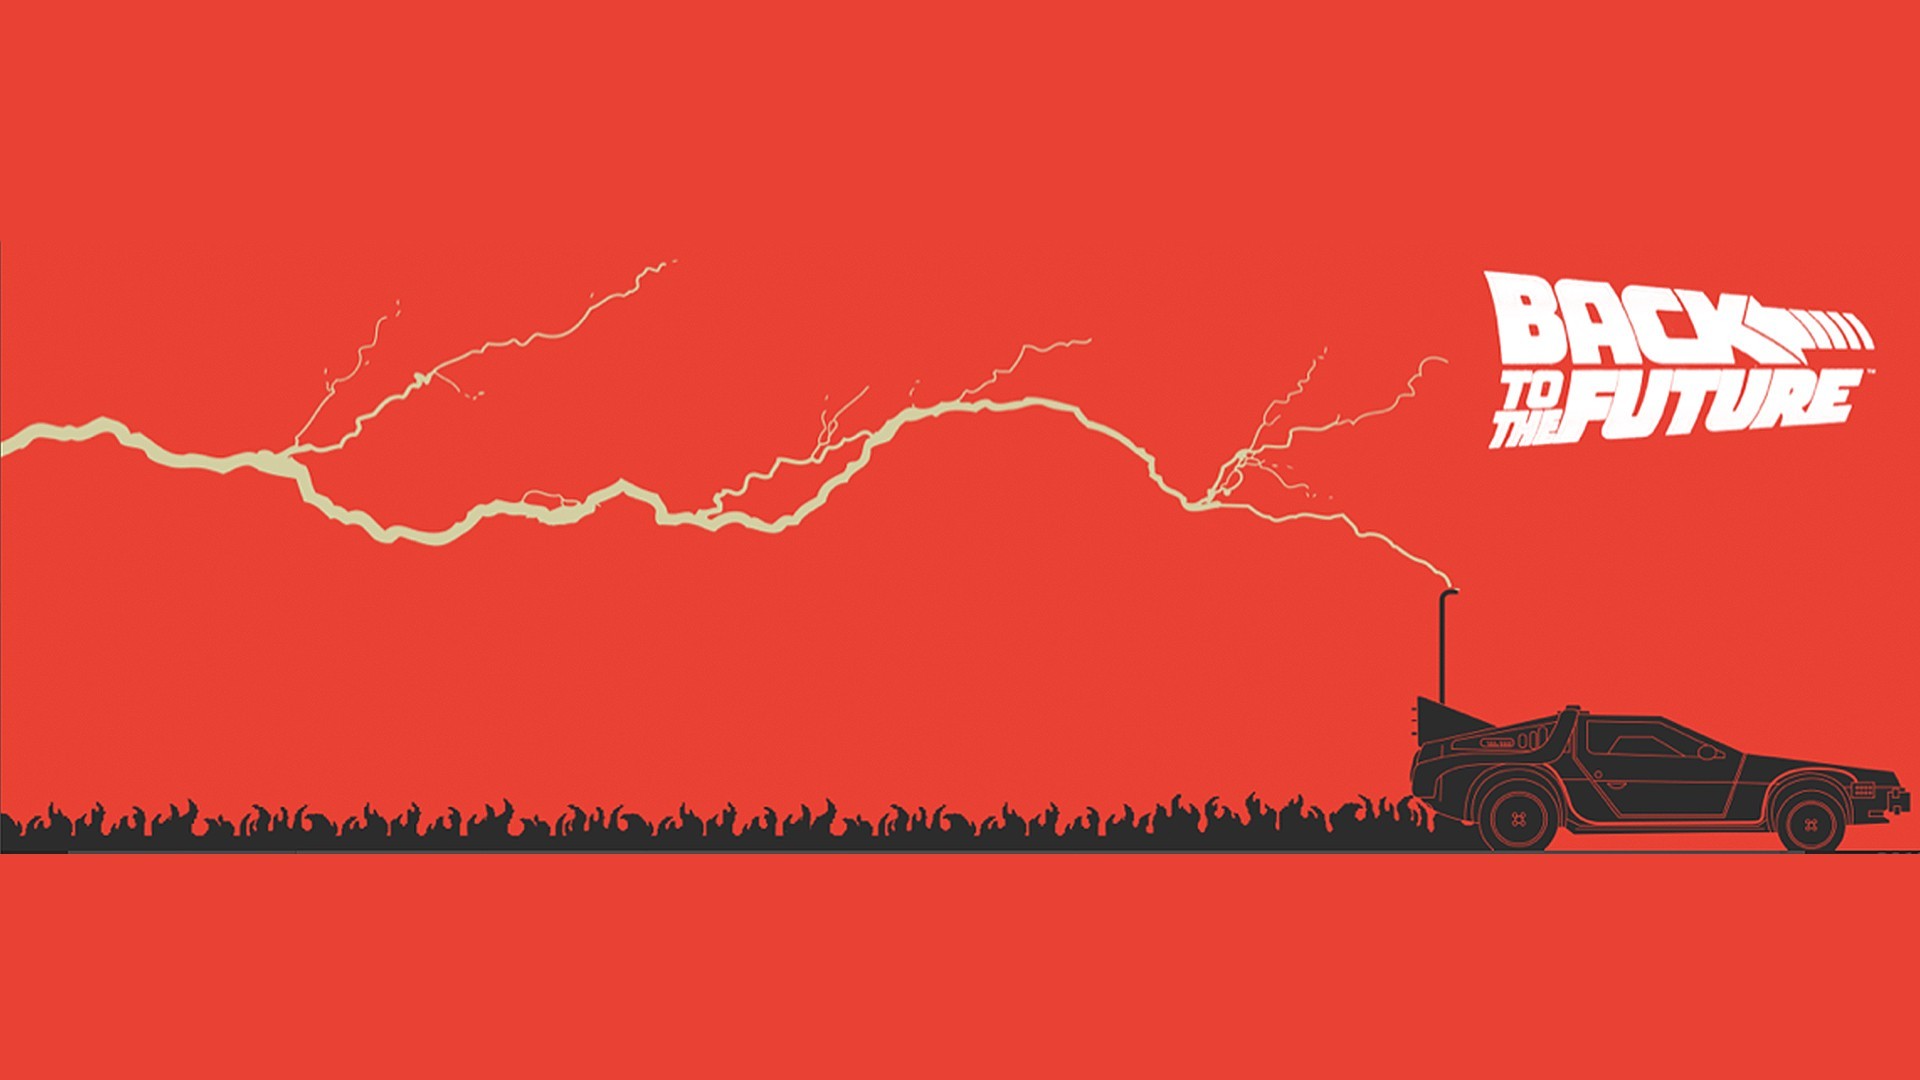 Back To The Future, Movies, Time Travel, Artwork, Minimalism Wallpaper